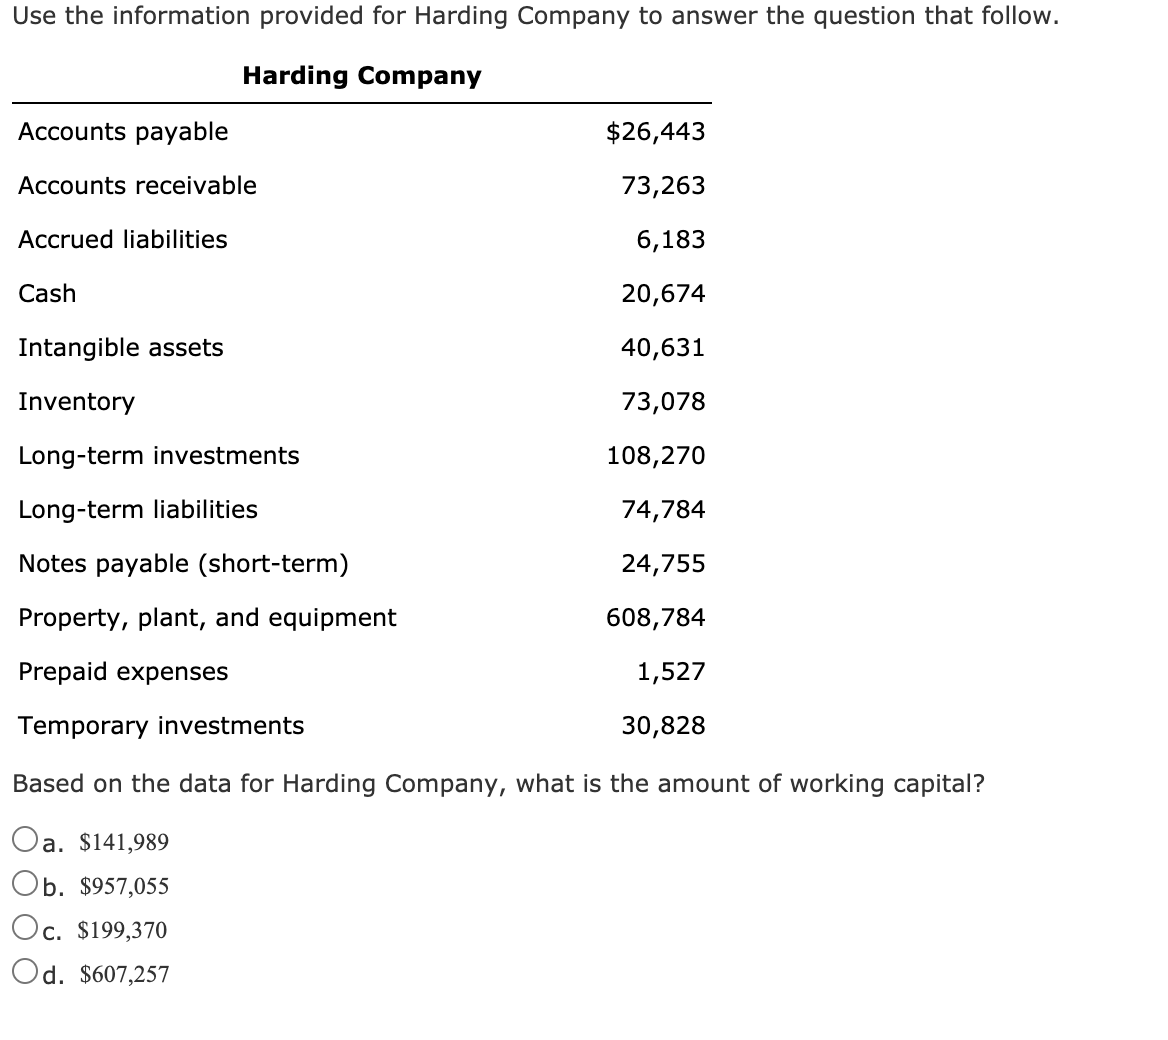 Use the information provided for Harding Company to answer the question that follow.
Harding Company
Accounts payable
$26,443
Accounts receivable
73,263
Accrued liabilities
6,183
Cash
20,674
Intangible assets
40,631
Inventory
73,078
Long-term investments
108,270
Long-term liabilities
74,784
Notes payable (short-term)
24,755
Property, plant, and equipment
608,784
Prepaid expenses
1,527
Temporary investments
30,828
Based on the data for Harding Company, what is the amount of working capital?
Oa. $141,989
Ob. $957,055
Oc. $199,370
Od. $607,257
